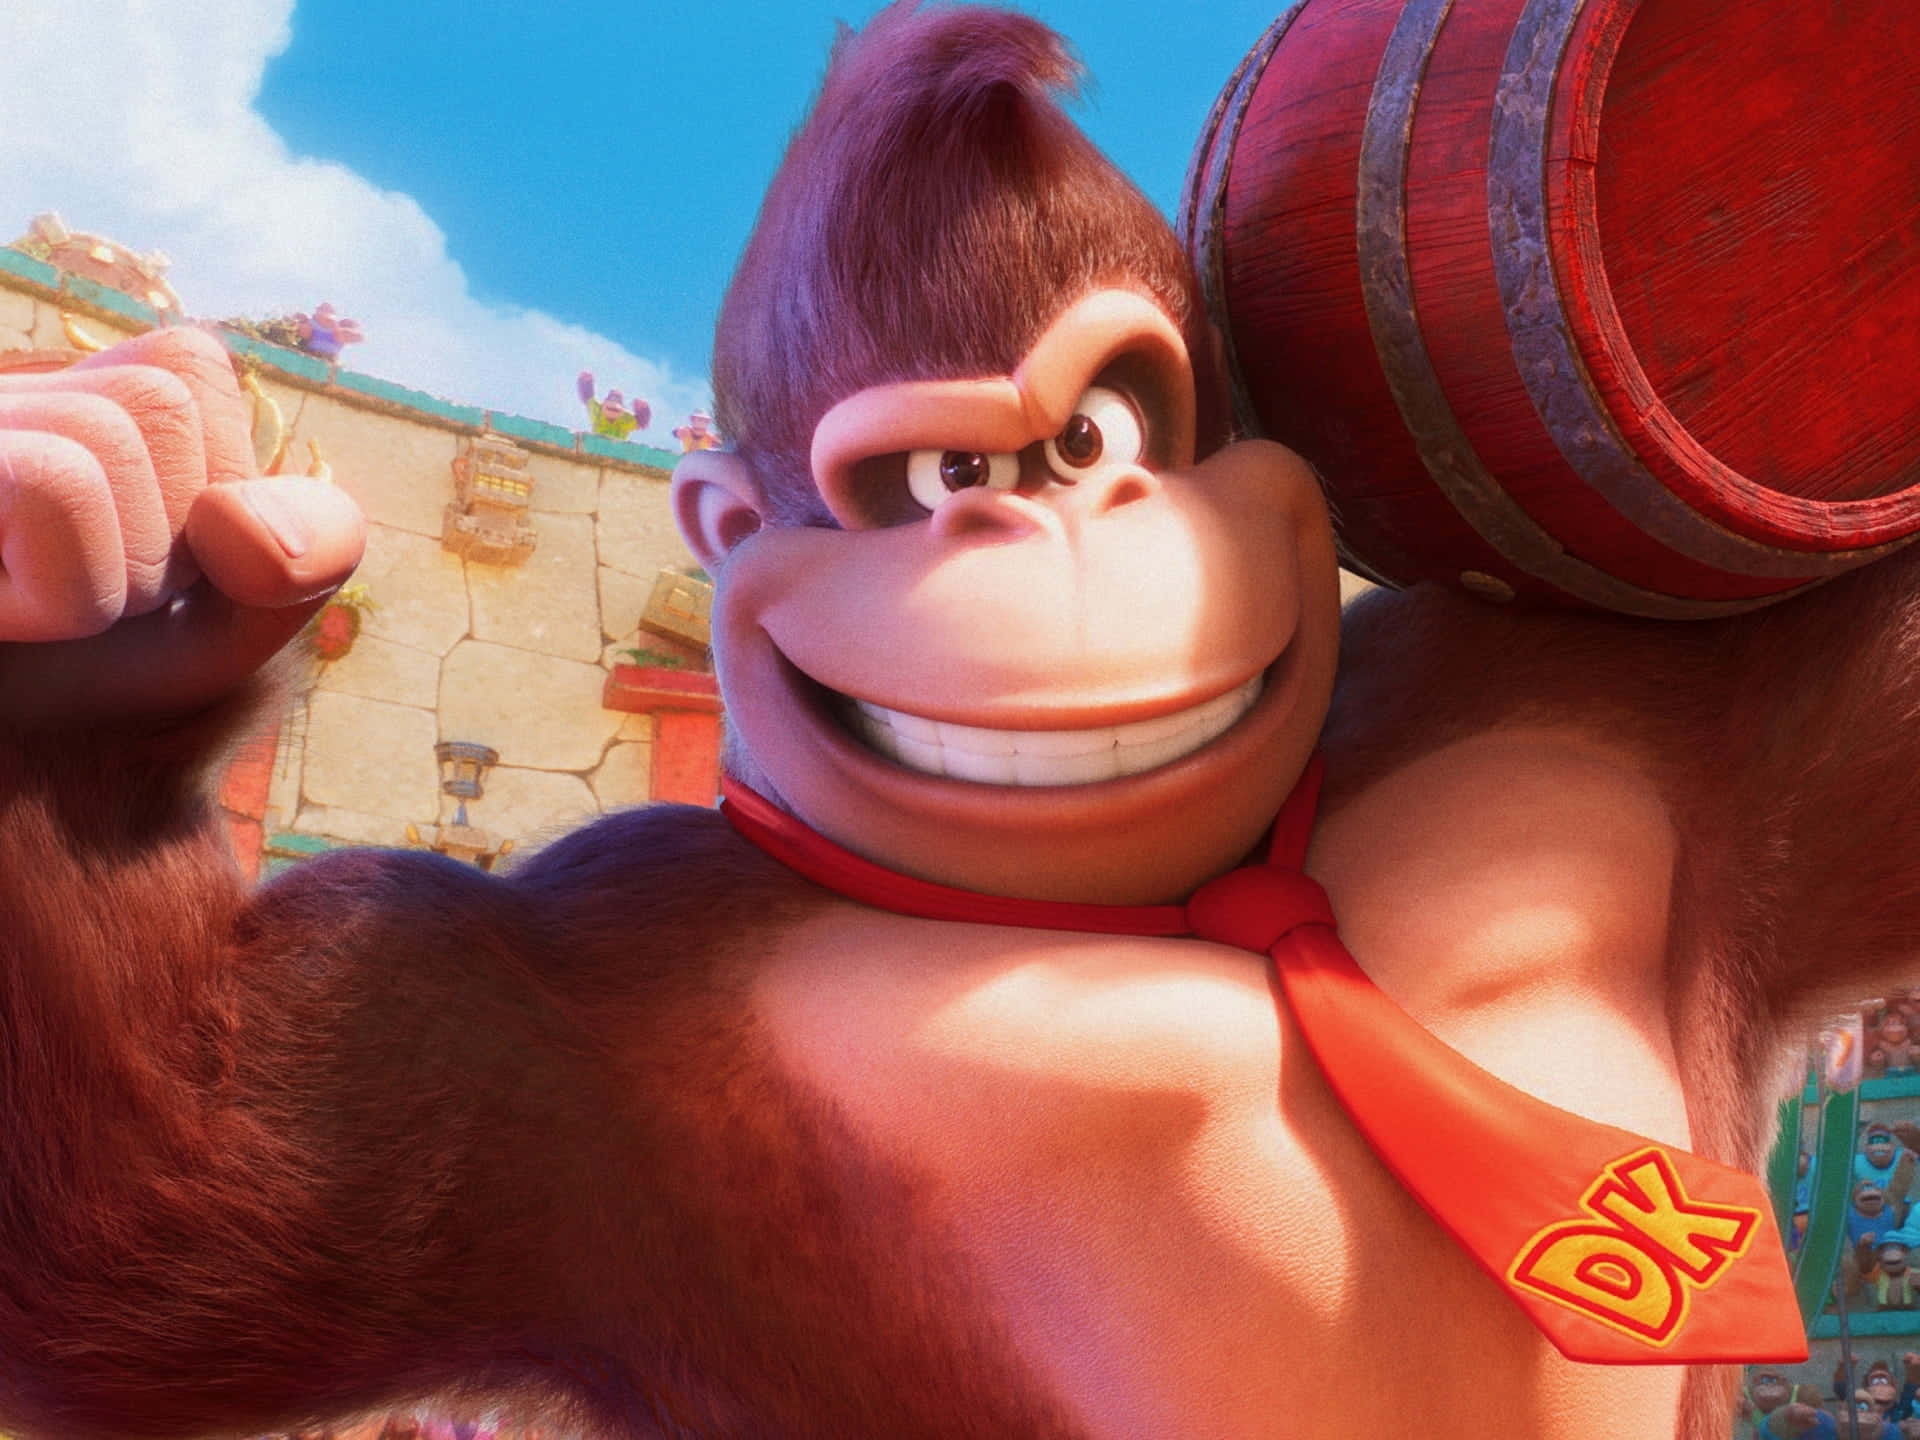 Donkey Kong In Action With Iconic Barrels And Platform Scene Background